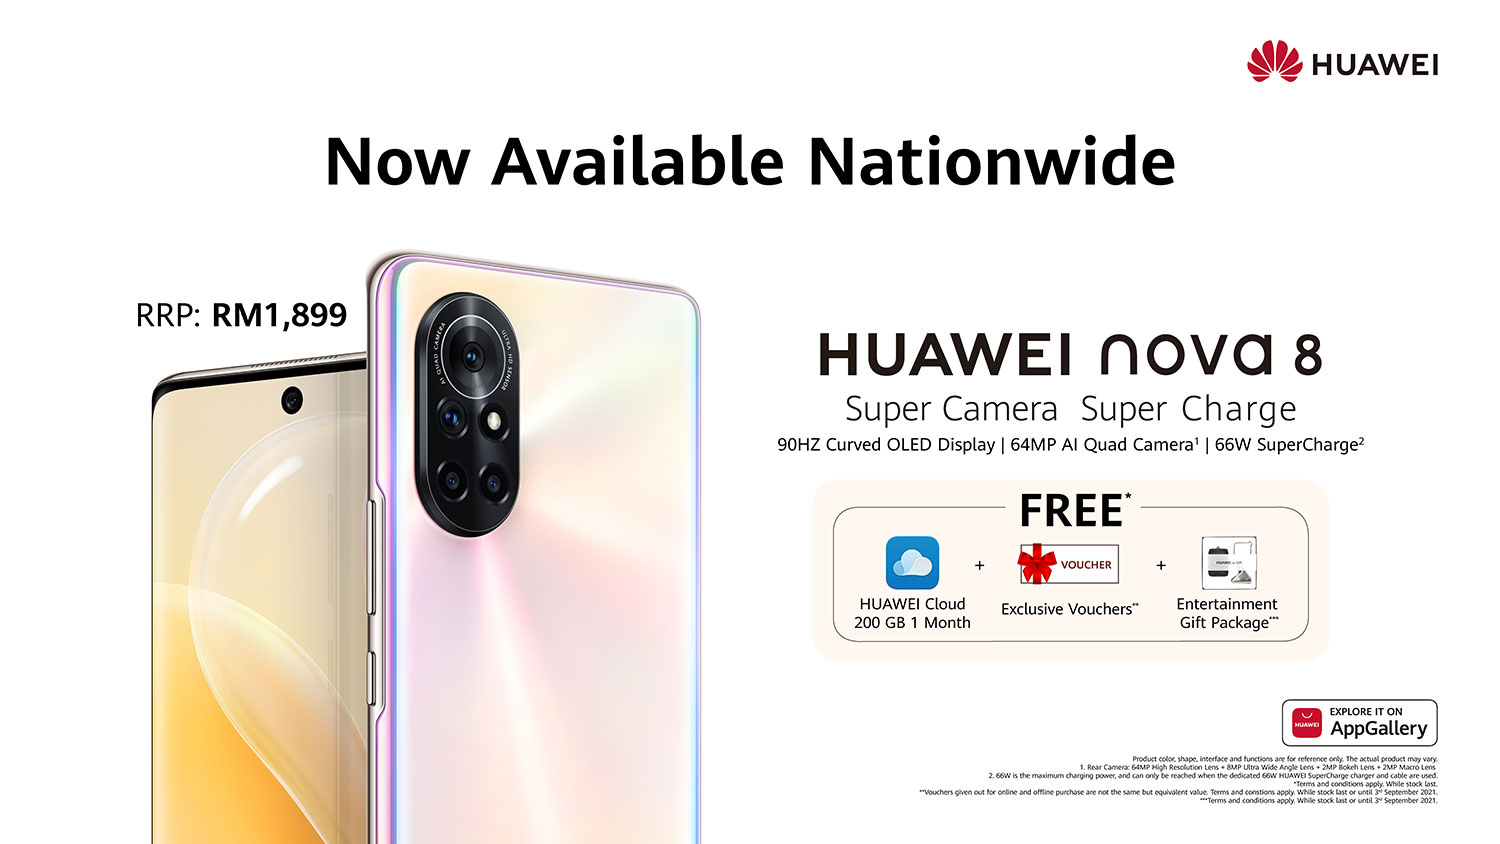 HUAWEI nova 8 Now Available in Malaysia